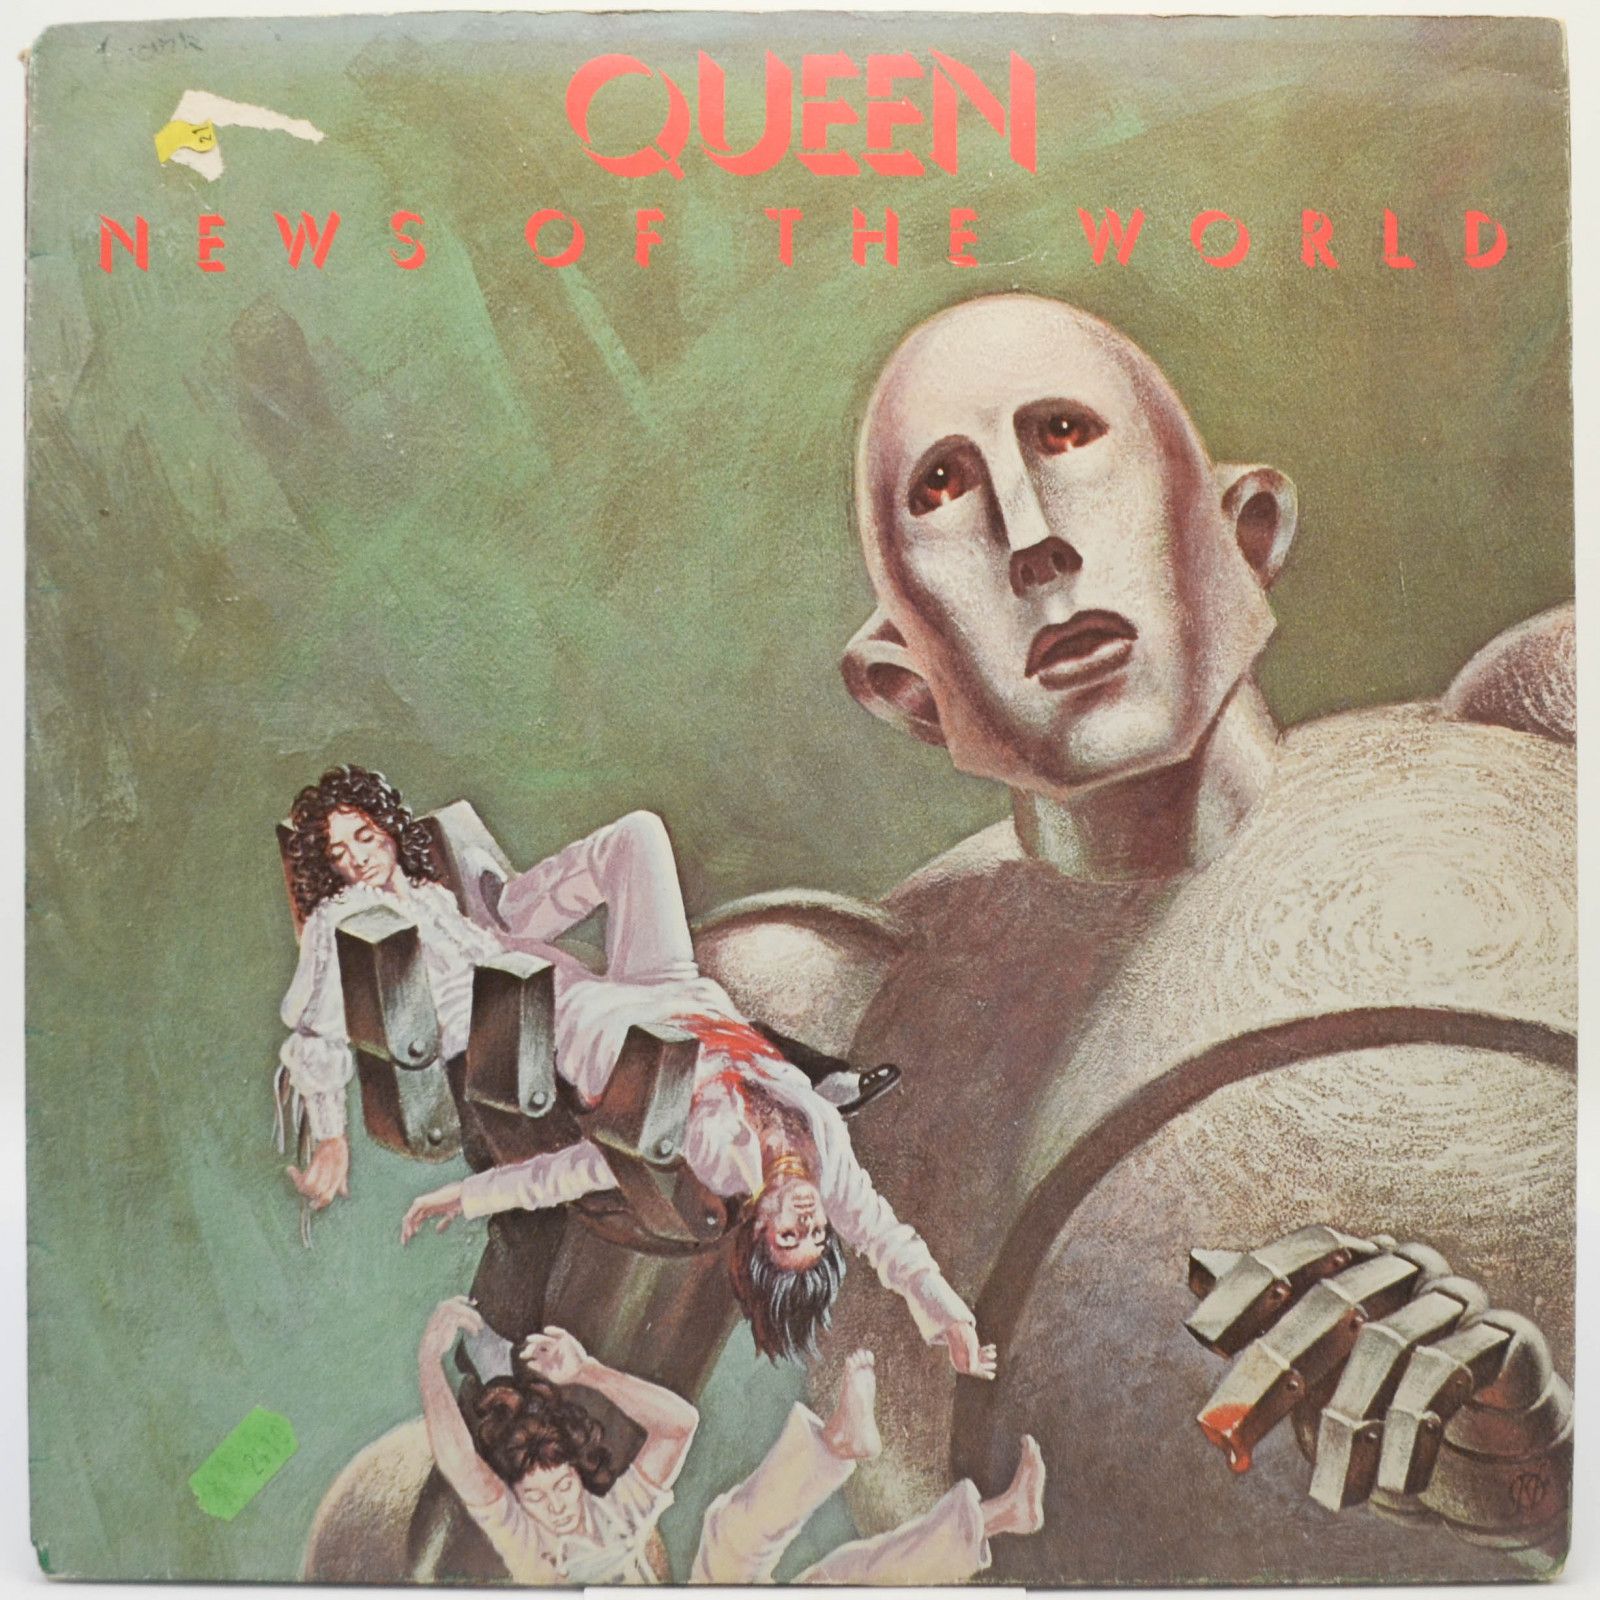 Queen — News Of The World, 1977